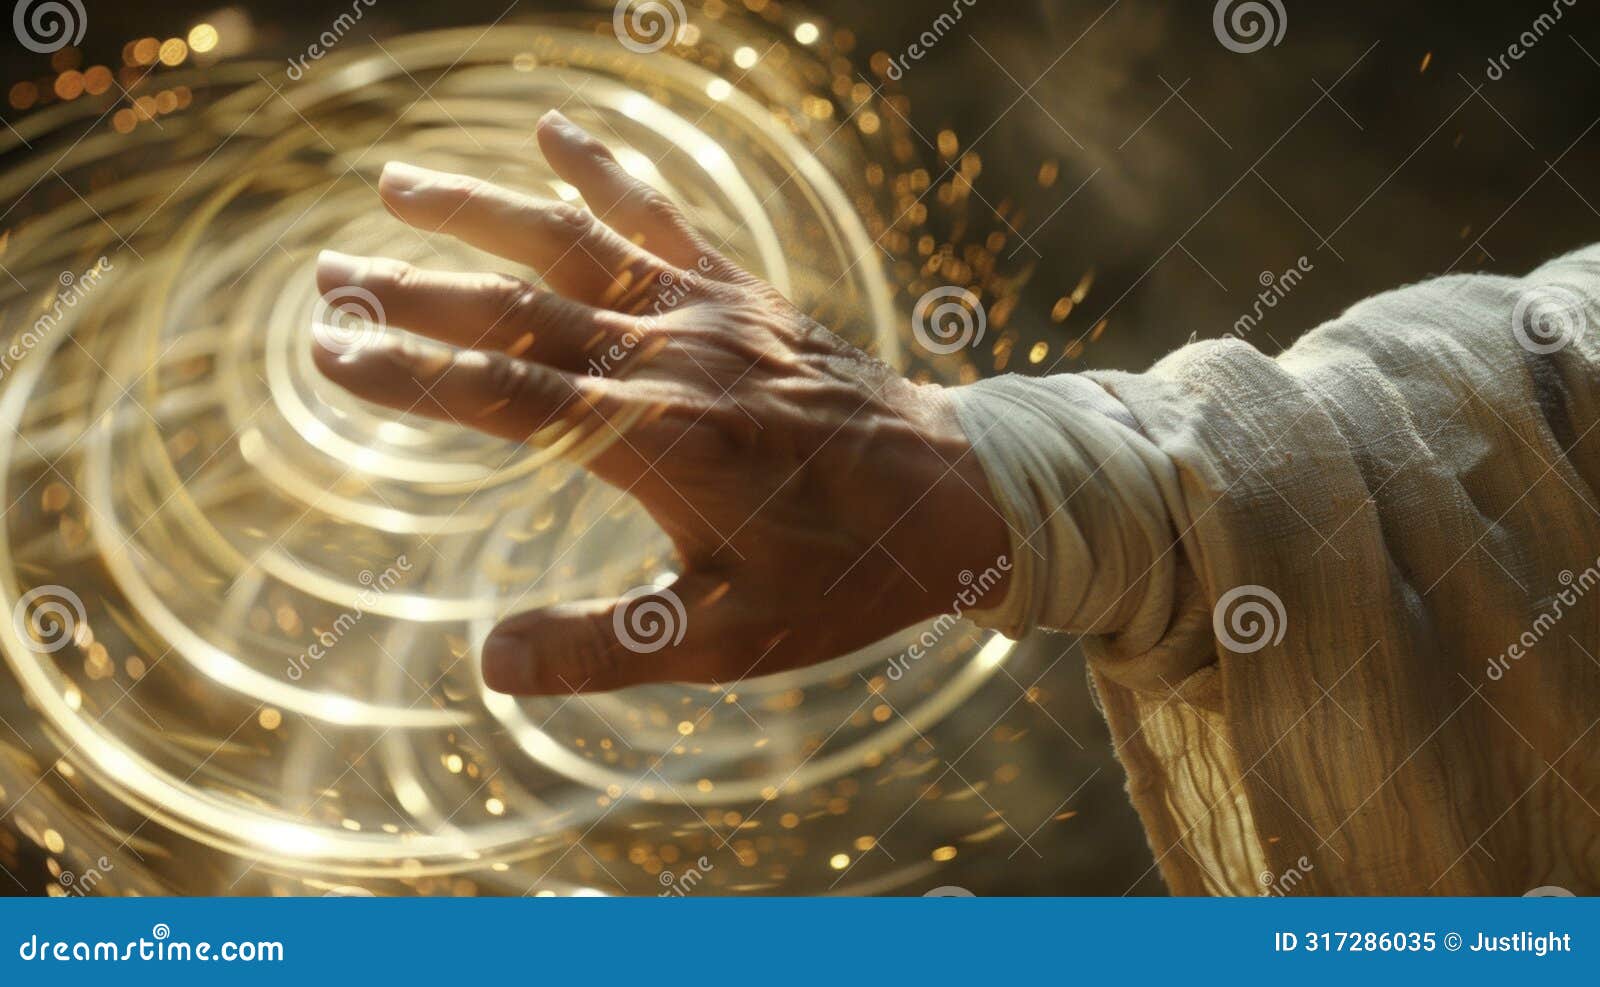 the intricate movements of a qi gong practitioners hands creating visible waves of energy as they harness their inner